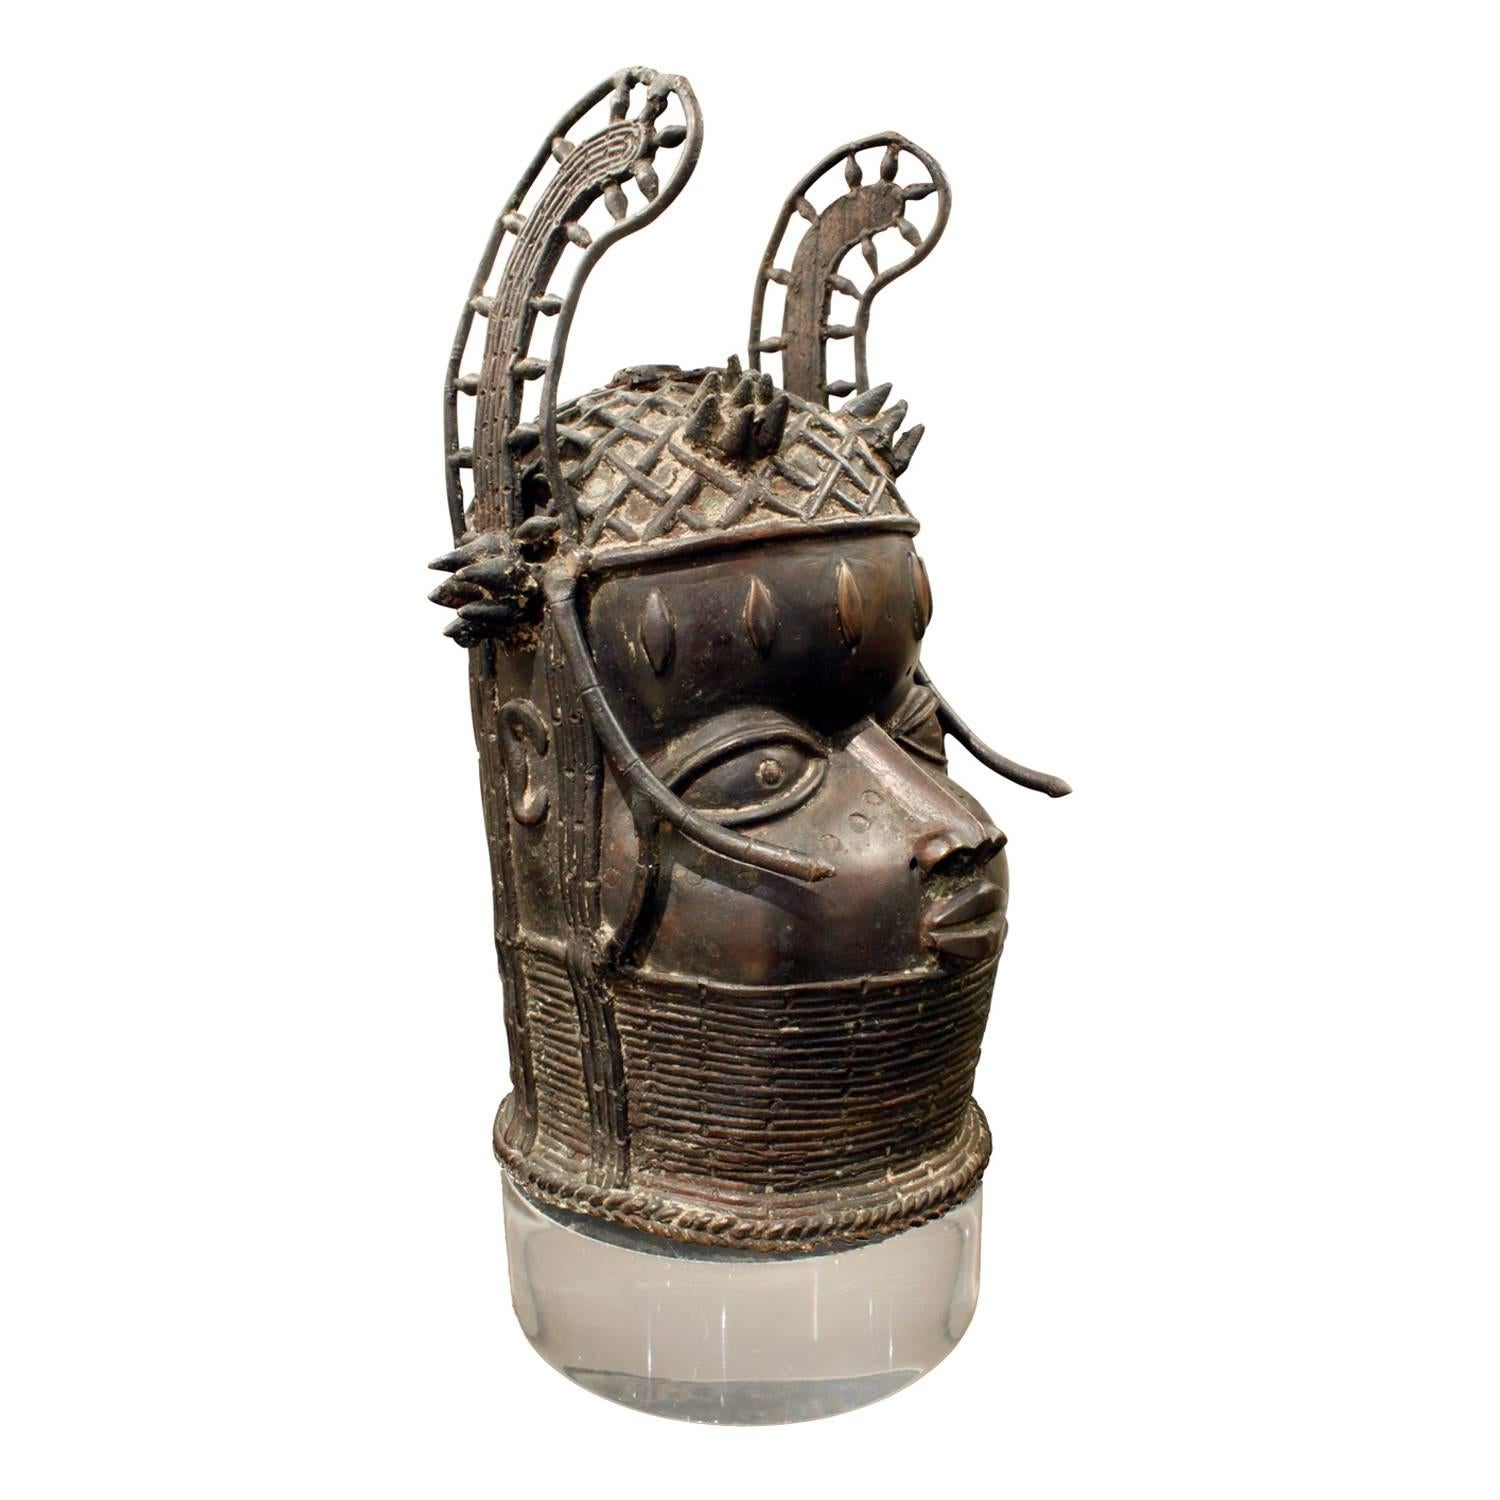 Authentic bronze Benin head on a custom Lucite base by Karl Springer, American 1970s (comes with a Letter of Authentication from Karl Springer's former Director of Design). Springer often incorporated fine works of ethnic art into his designs.